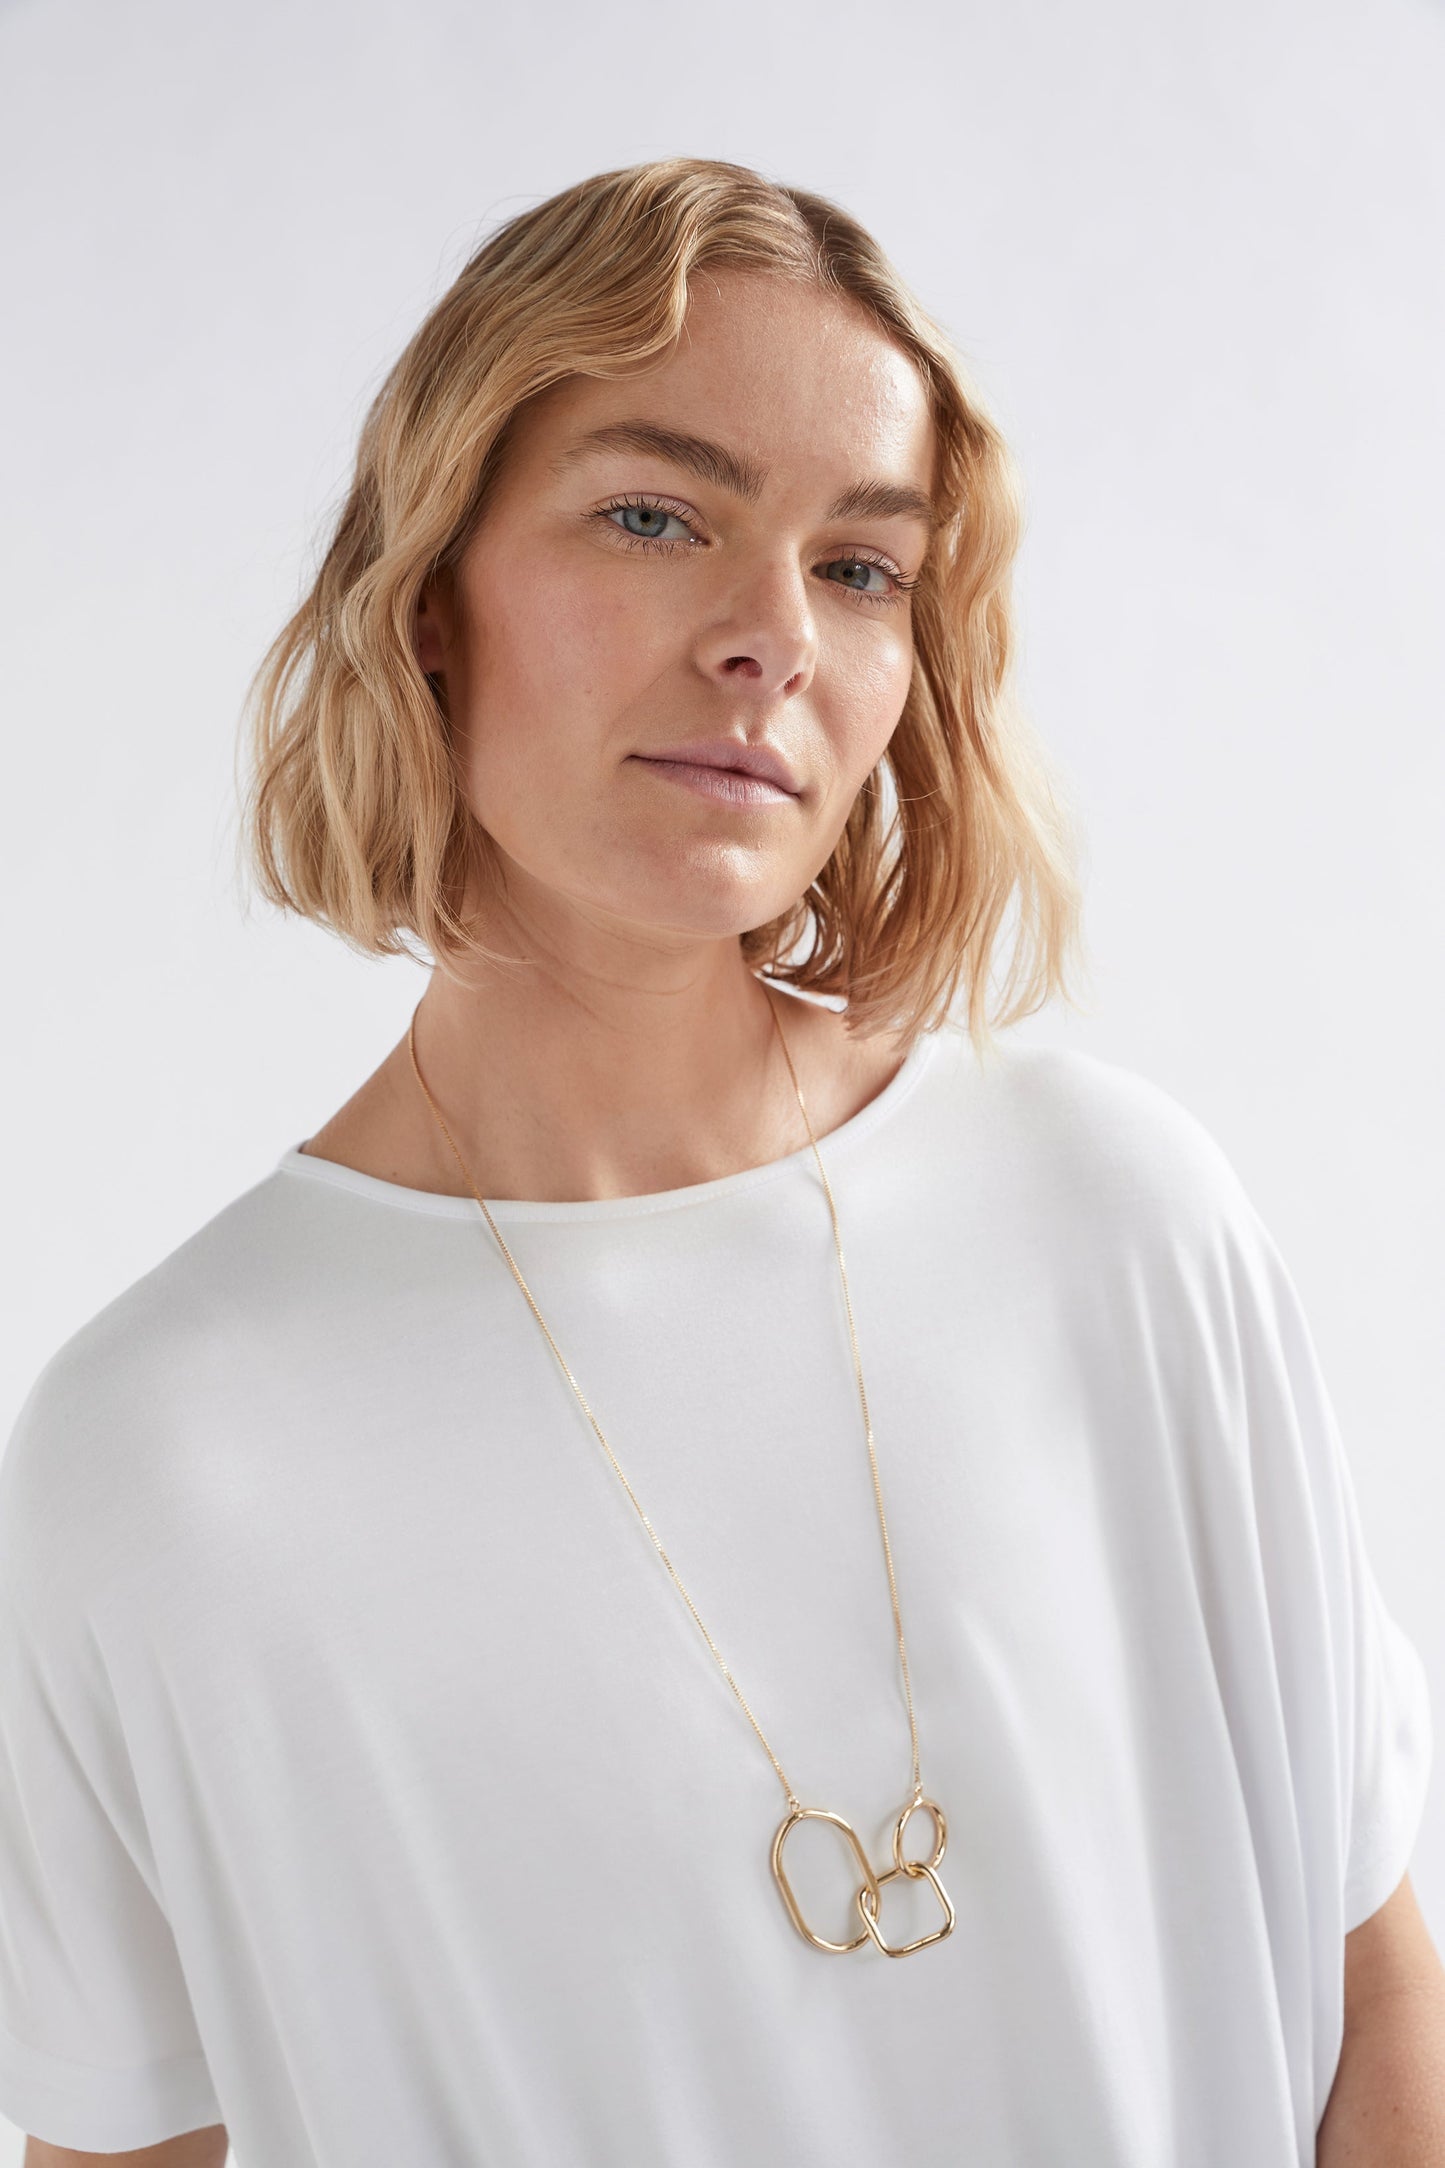 Rei Simple Long Gold Chain and Loop Pendant Necklace Model | GOLD